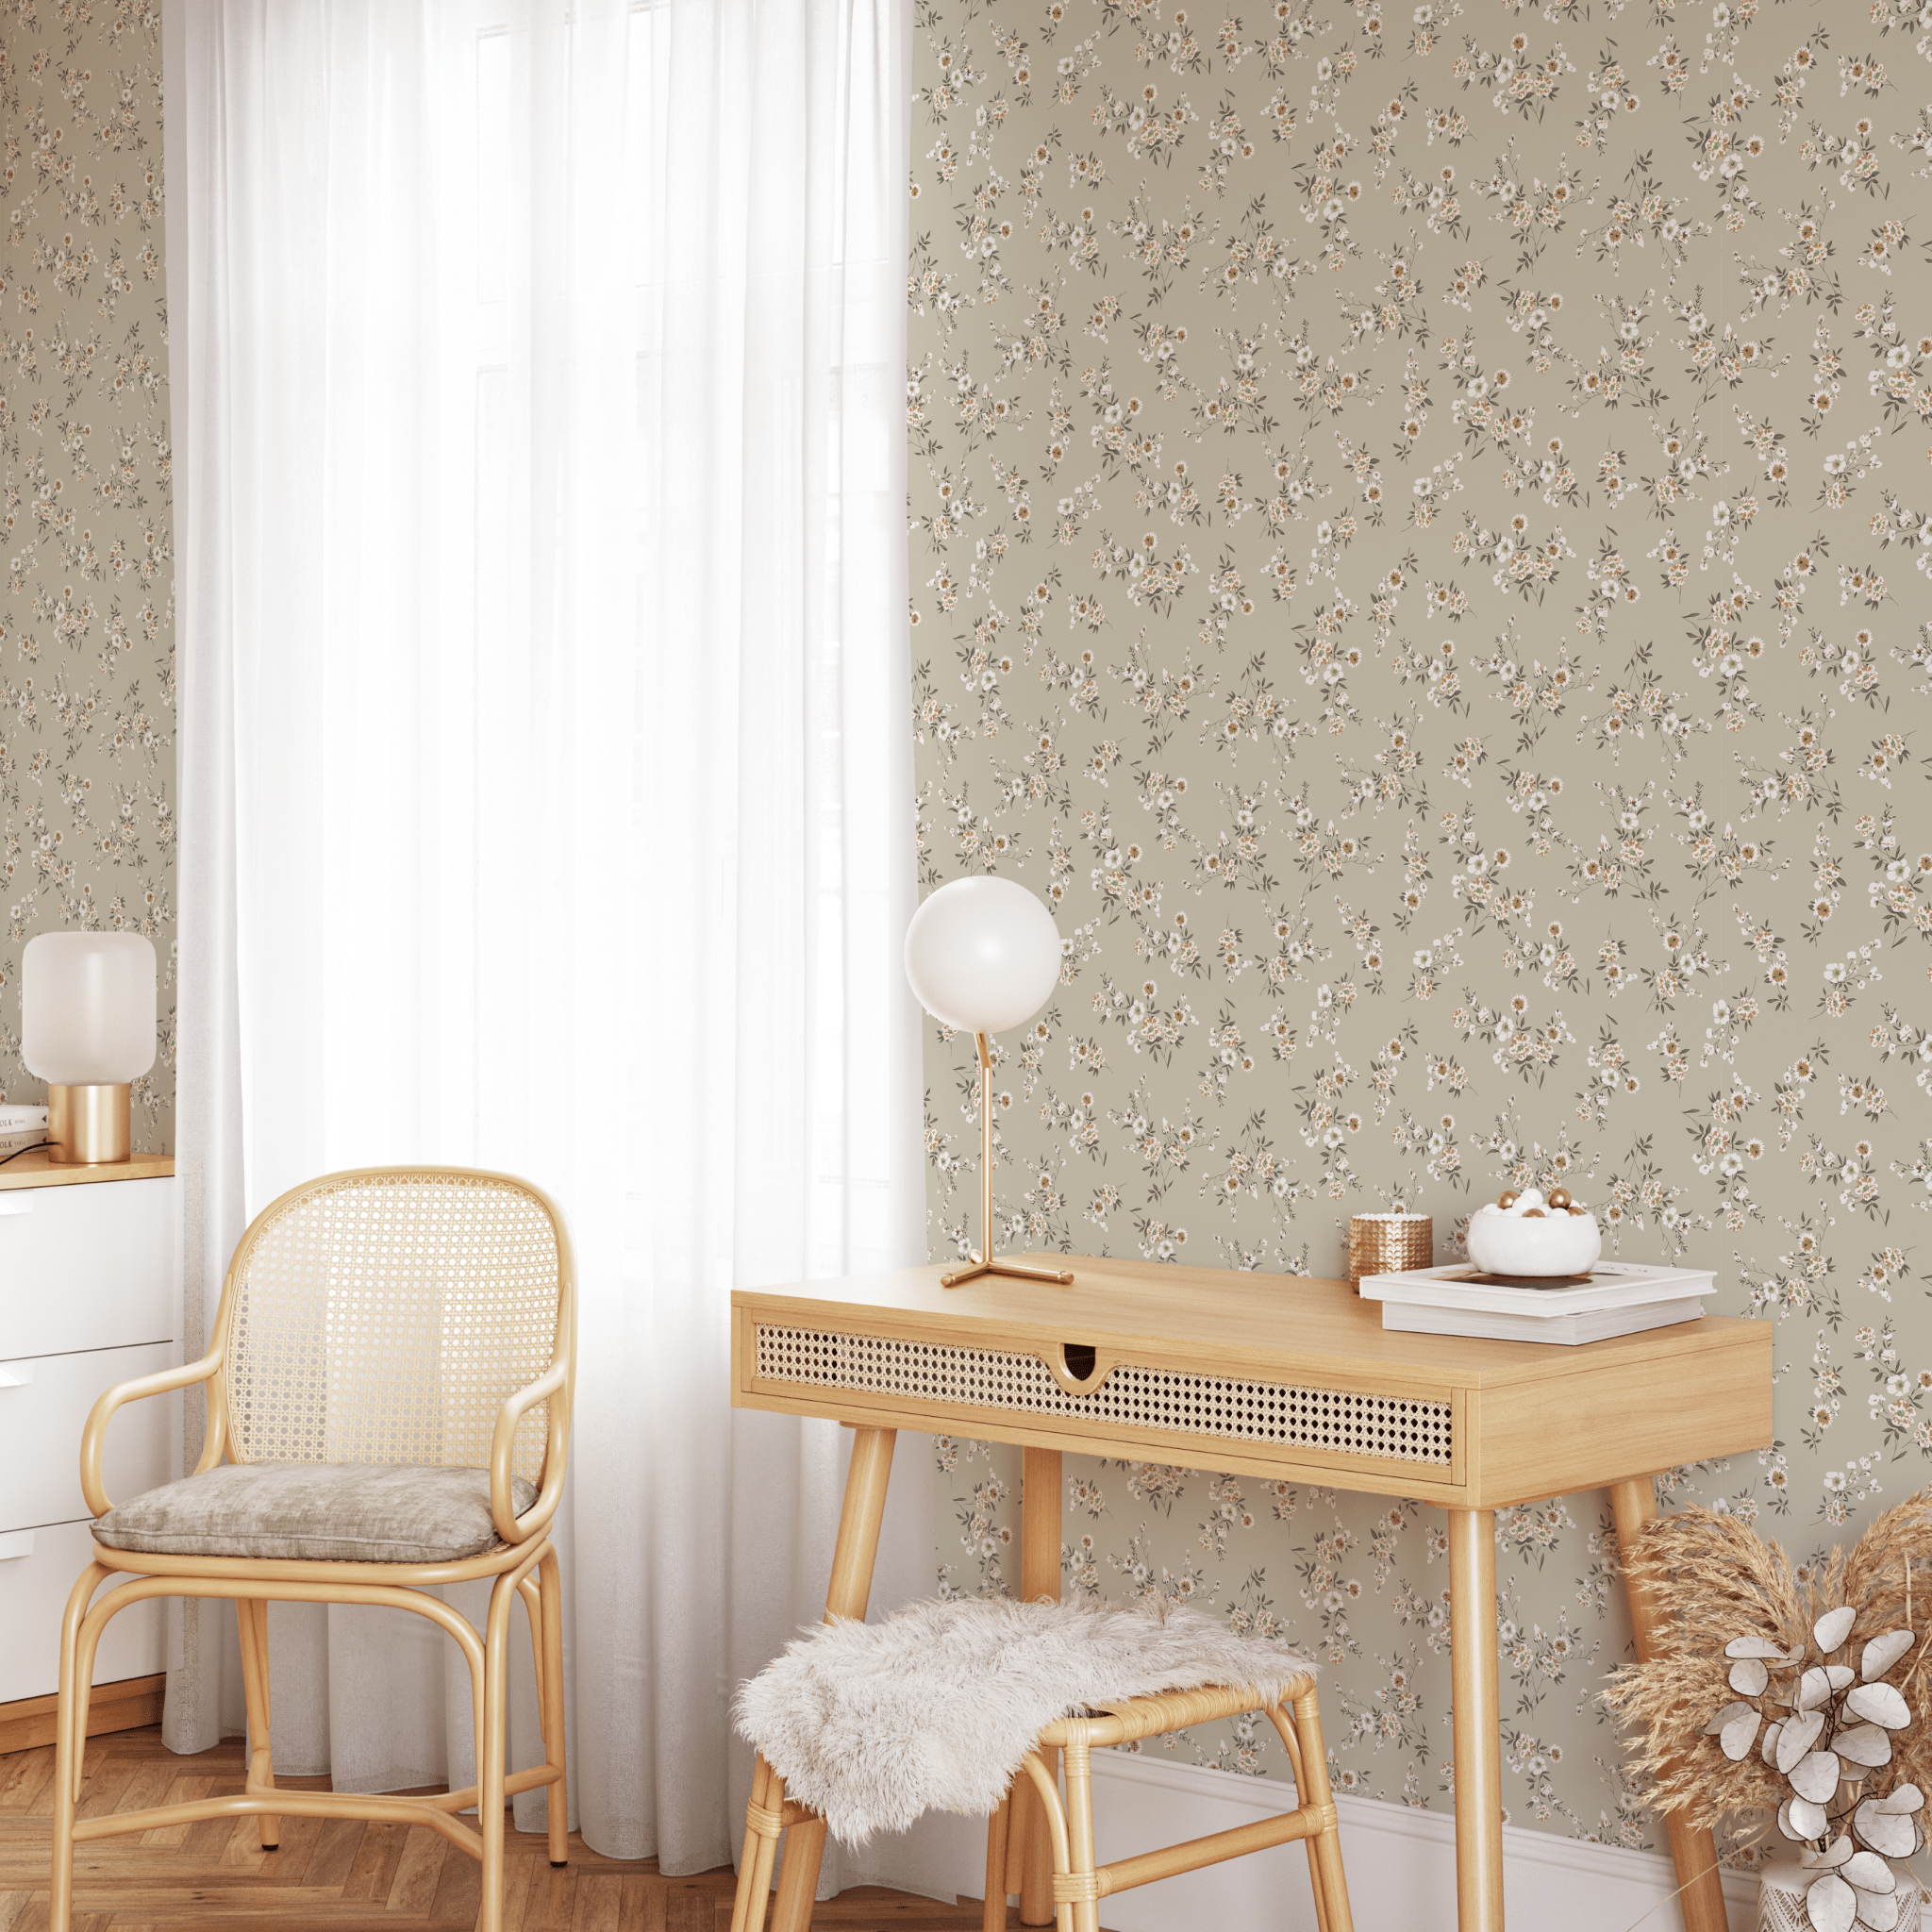 A room corner with beige floral wallpaper, rattan chair, wooden desk, and sheer-curtained window.